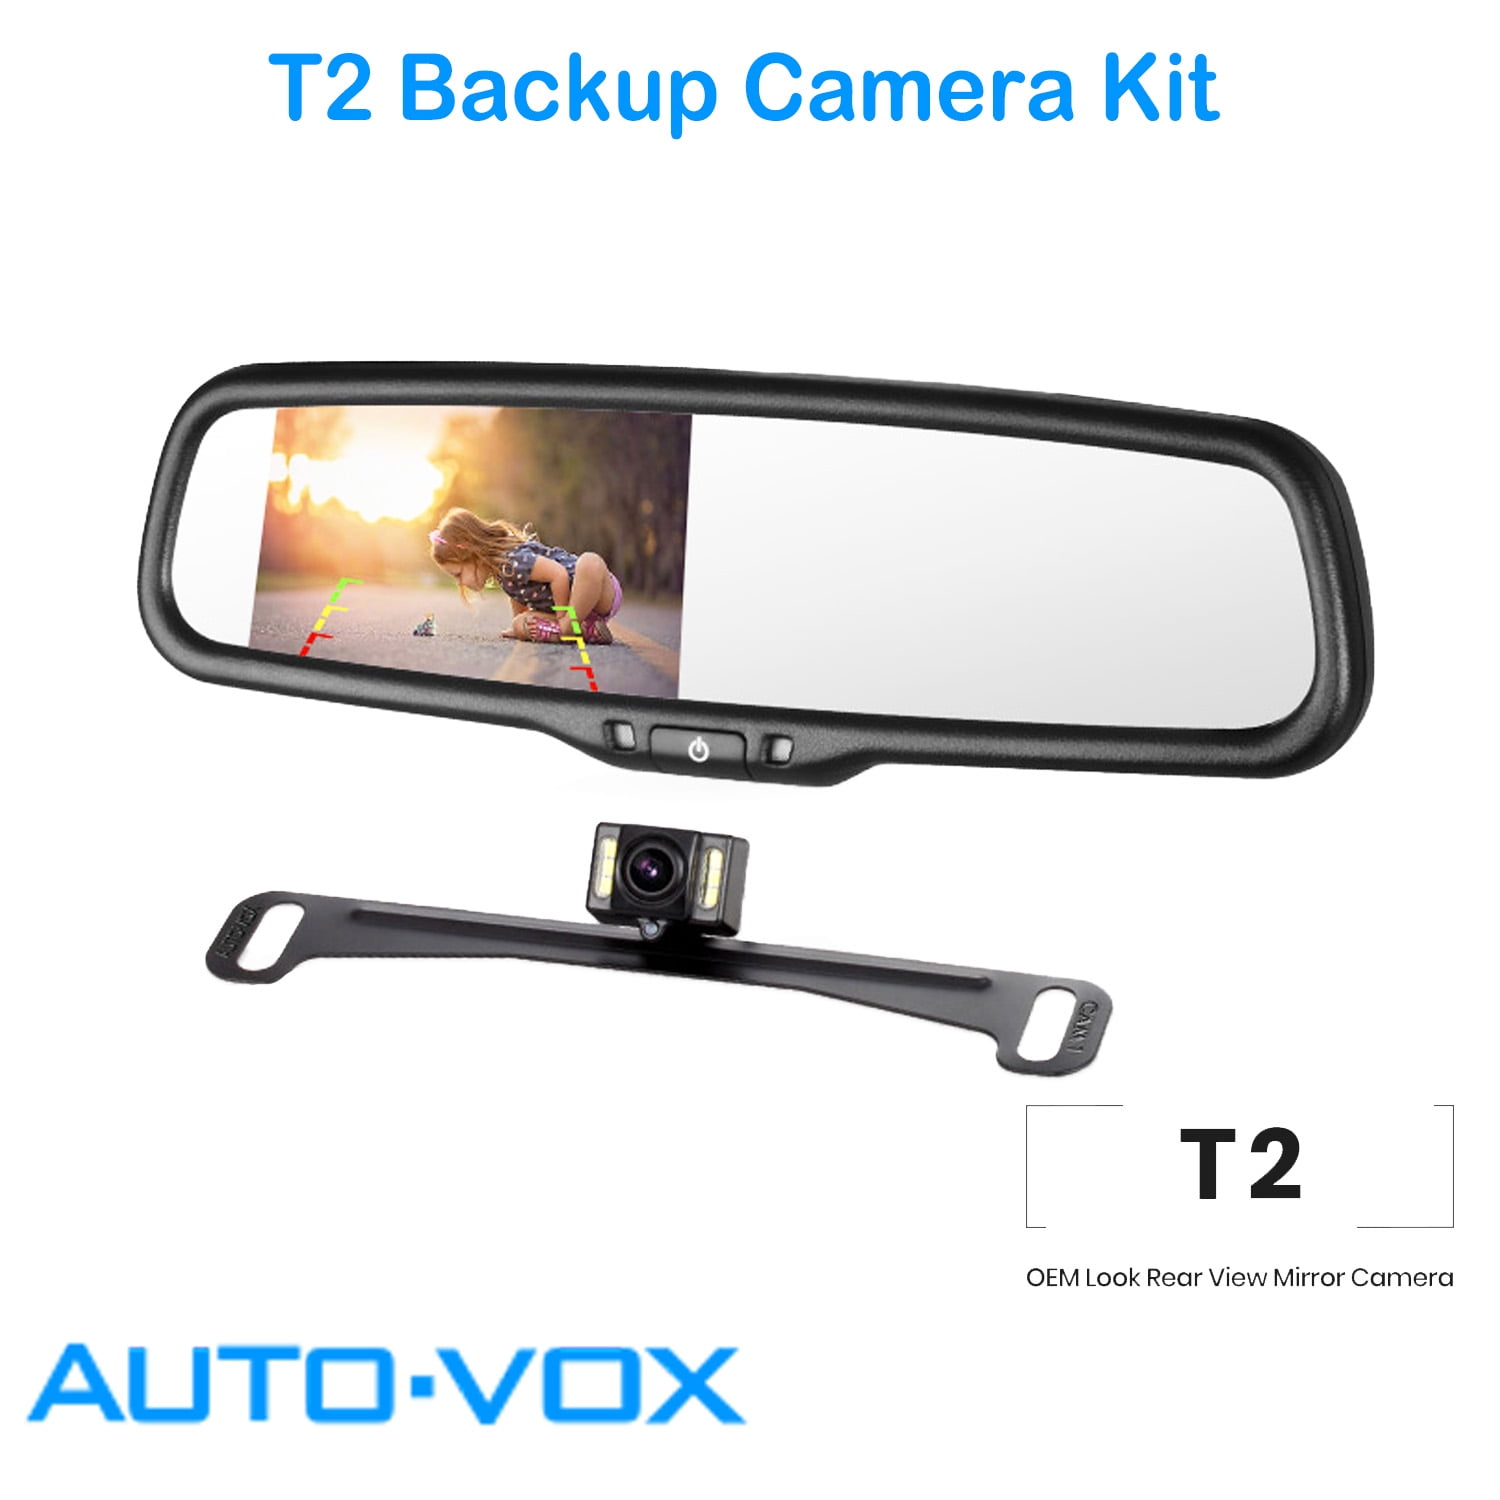 Wireless Backup Camera Truck Hitch Trailer - Easy Install Digital Stable  Signal HD 1080P Car Rear View Camera with 4.3 Inch Monitor System Super  Night